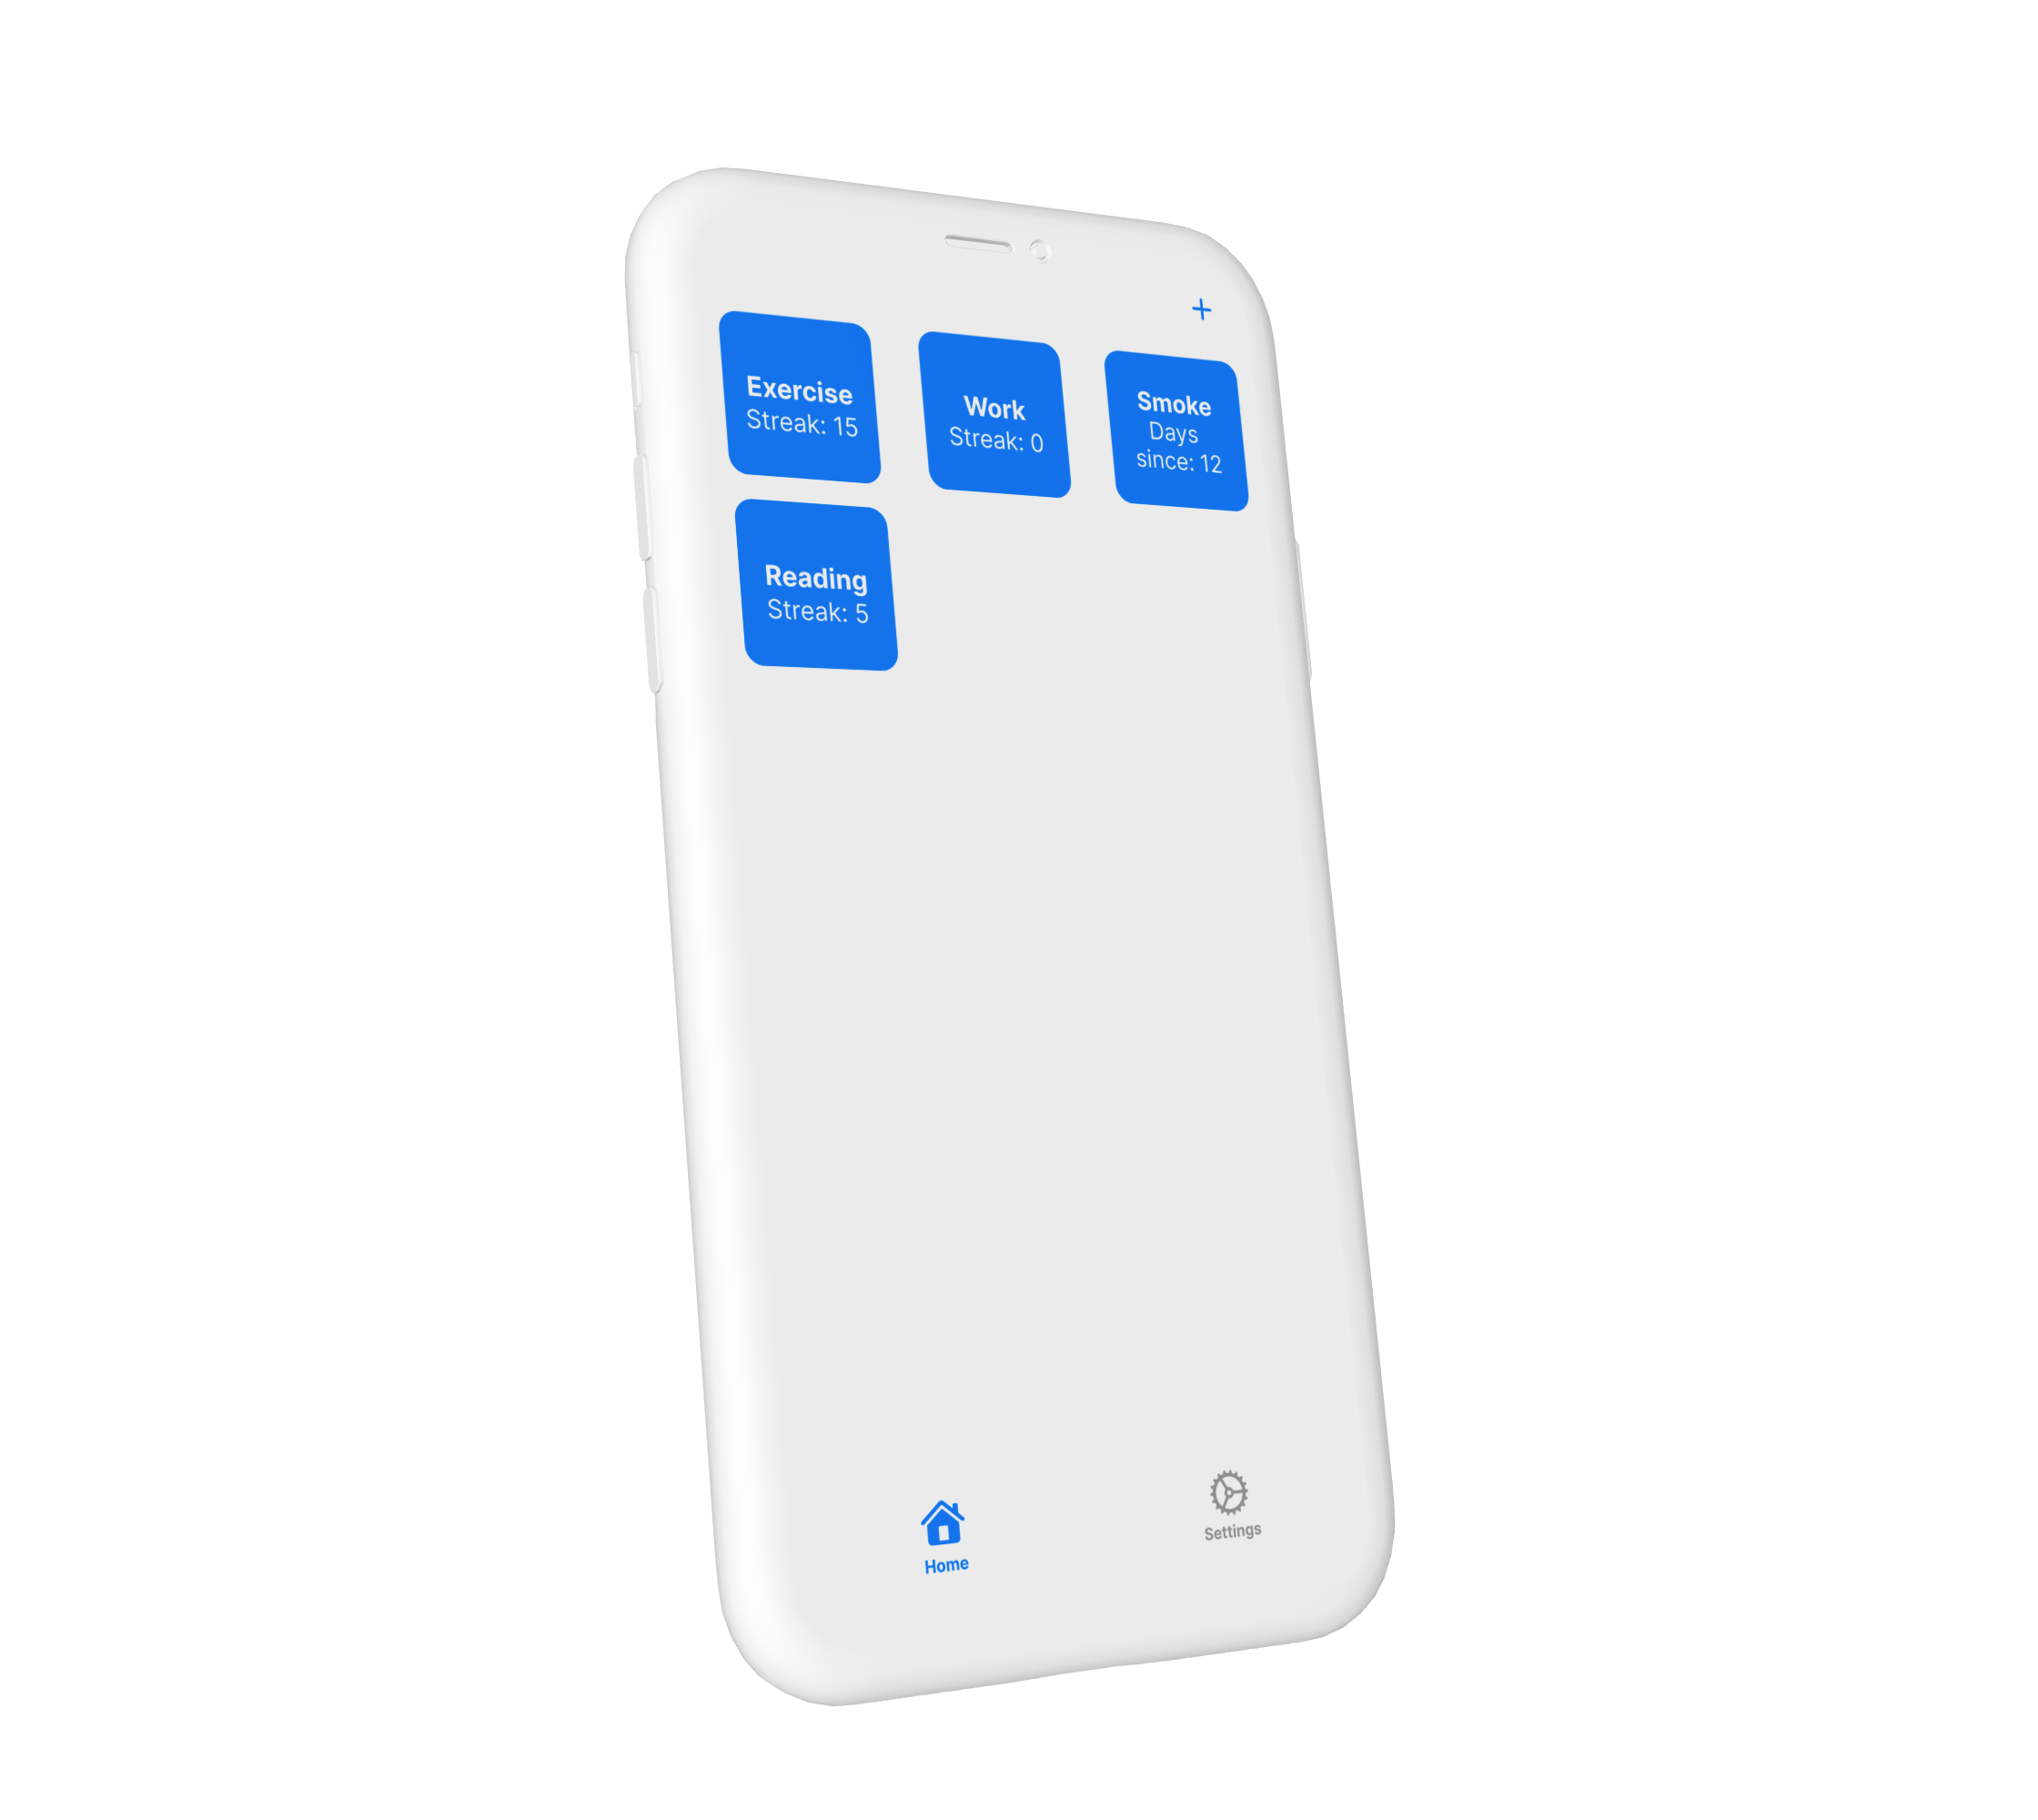 A phone where the myhabbit app is running